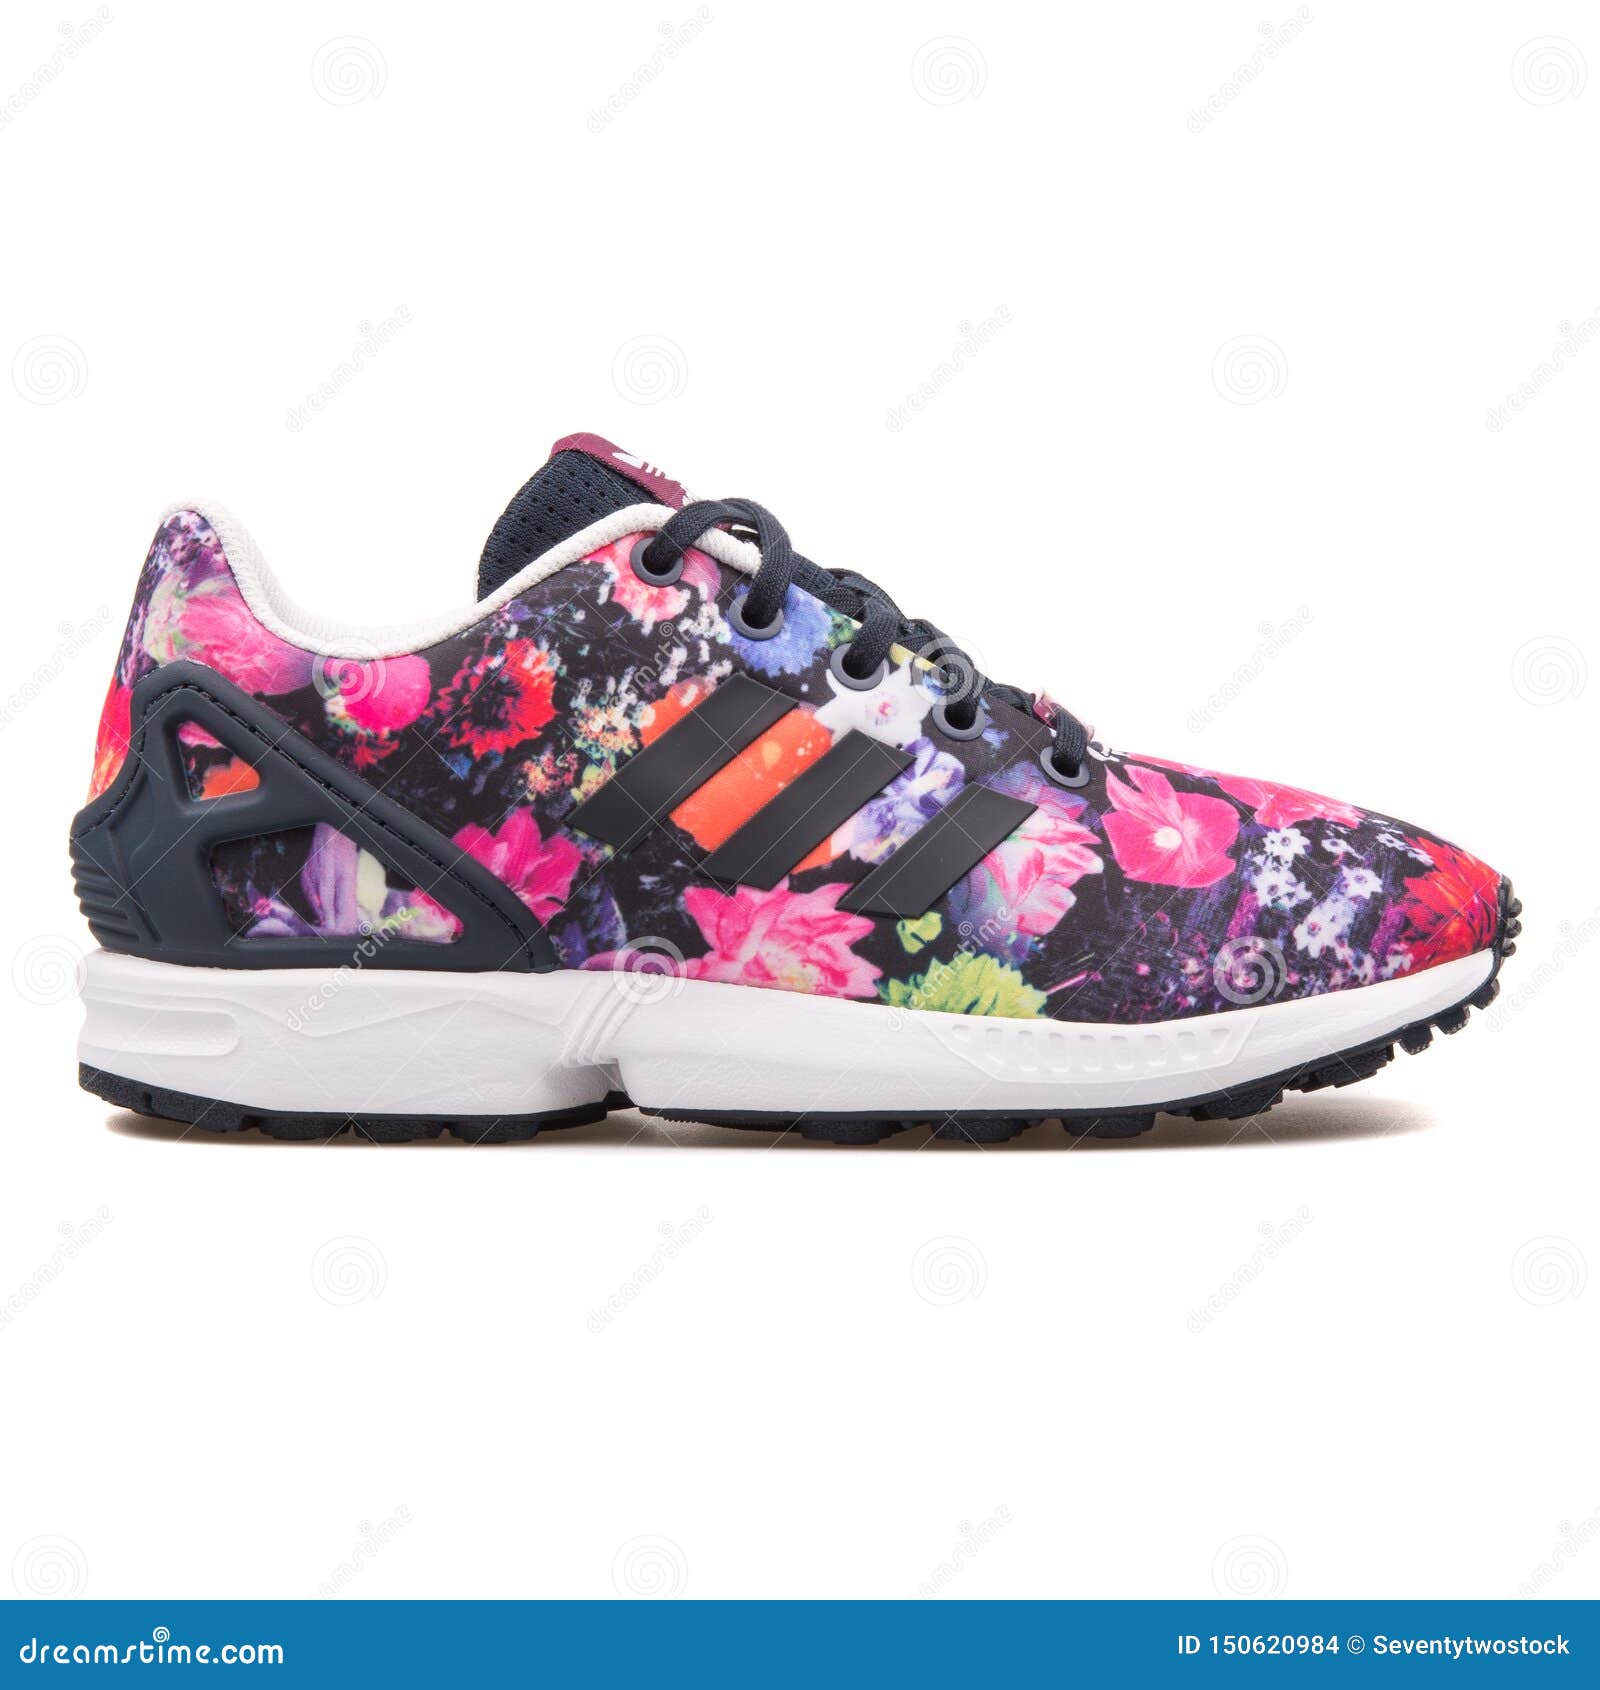 Adidas ZX Black and Multi Floral Print Sneaker Editorial Stock Image - Image of leather, casual: 150620984